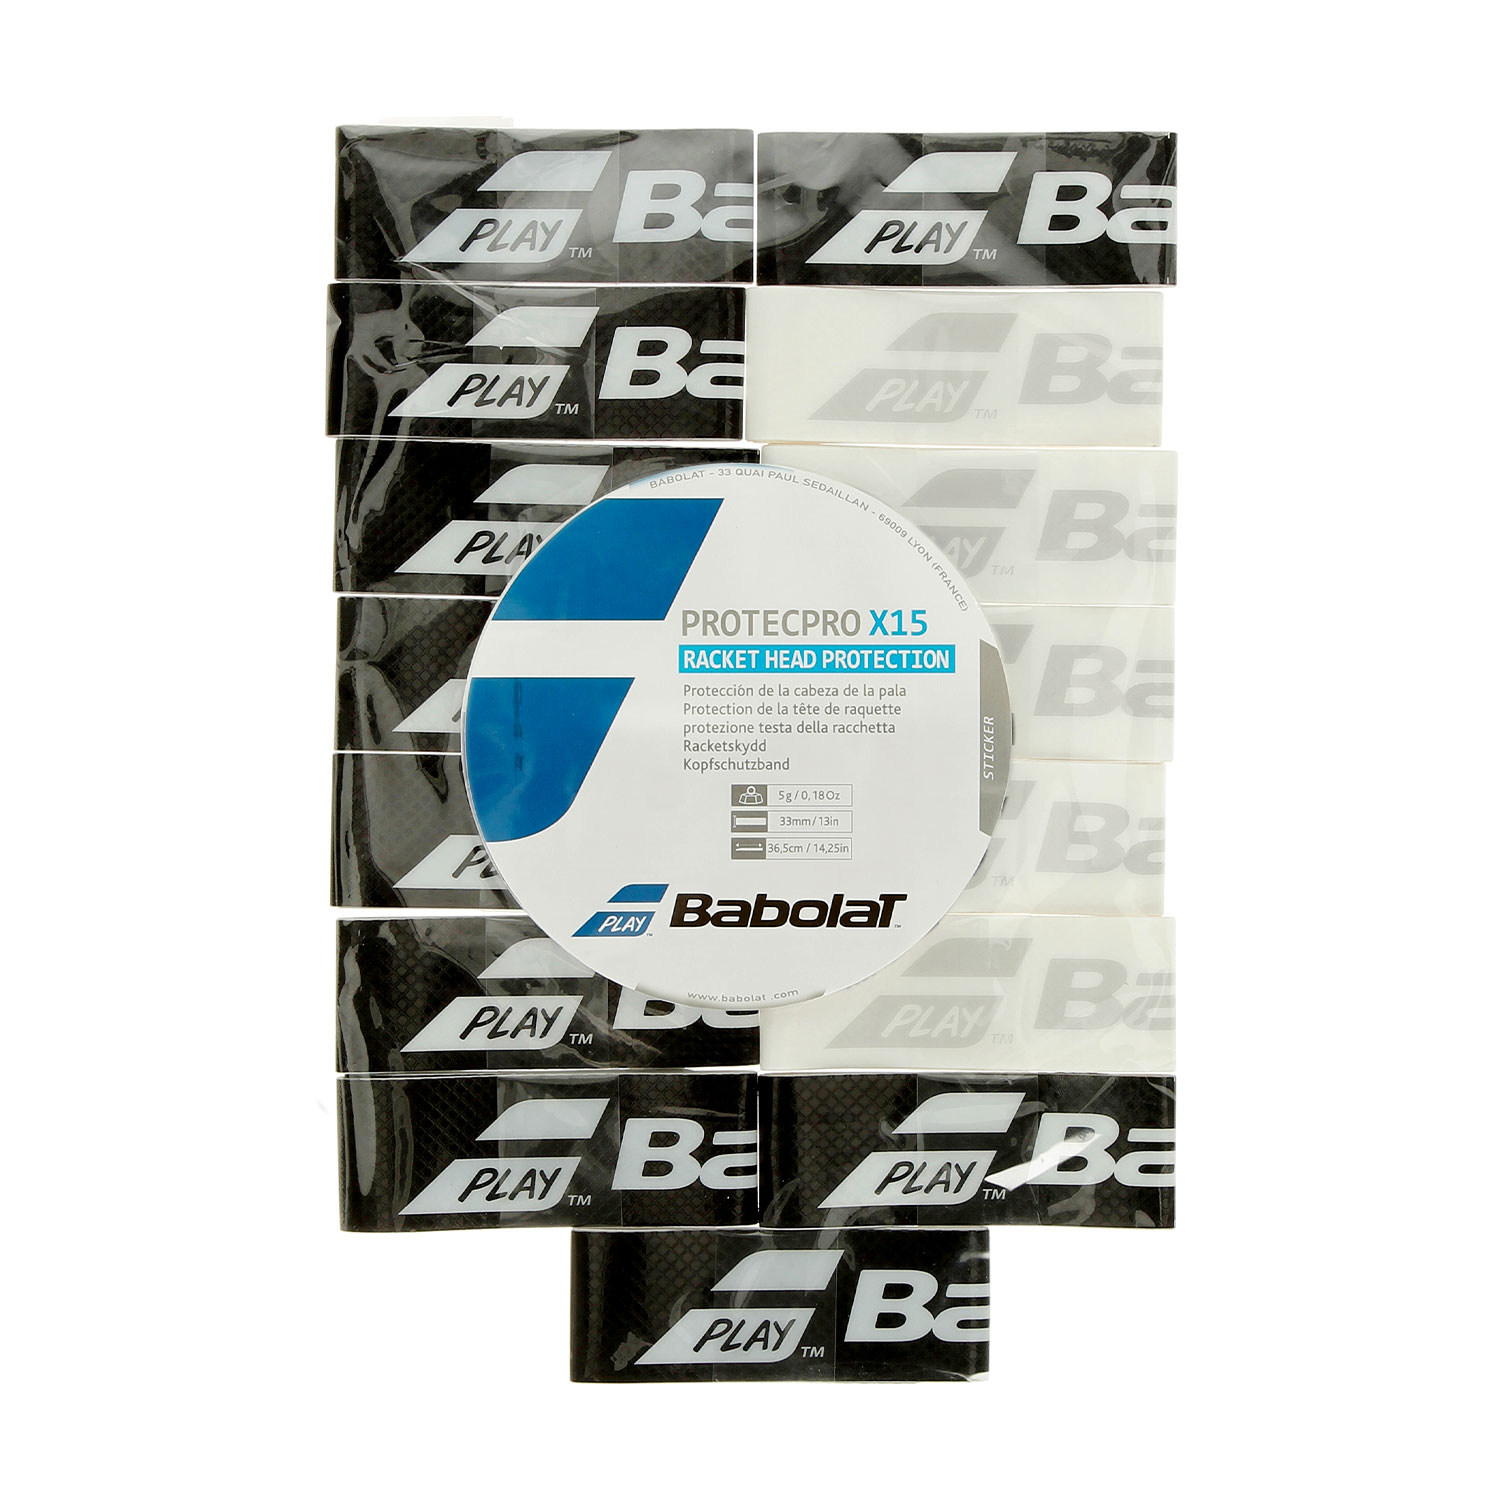 Babolat Protecpro x 15 Protective Tape - Assorted